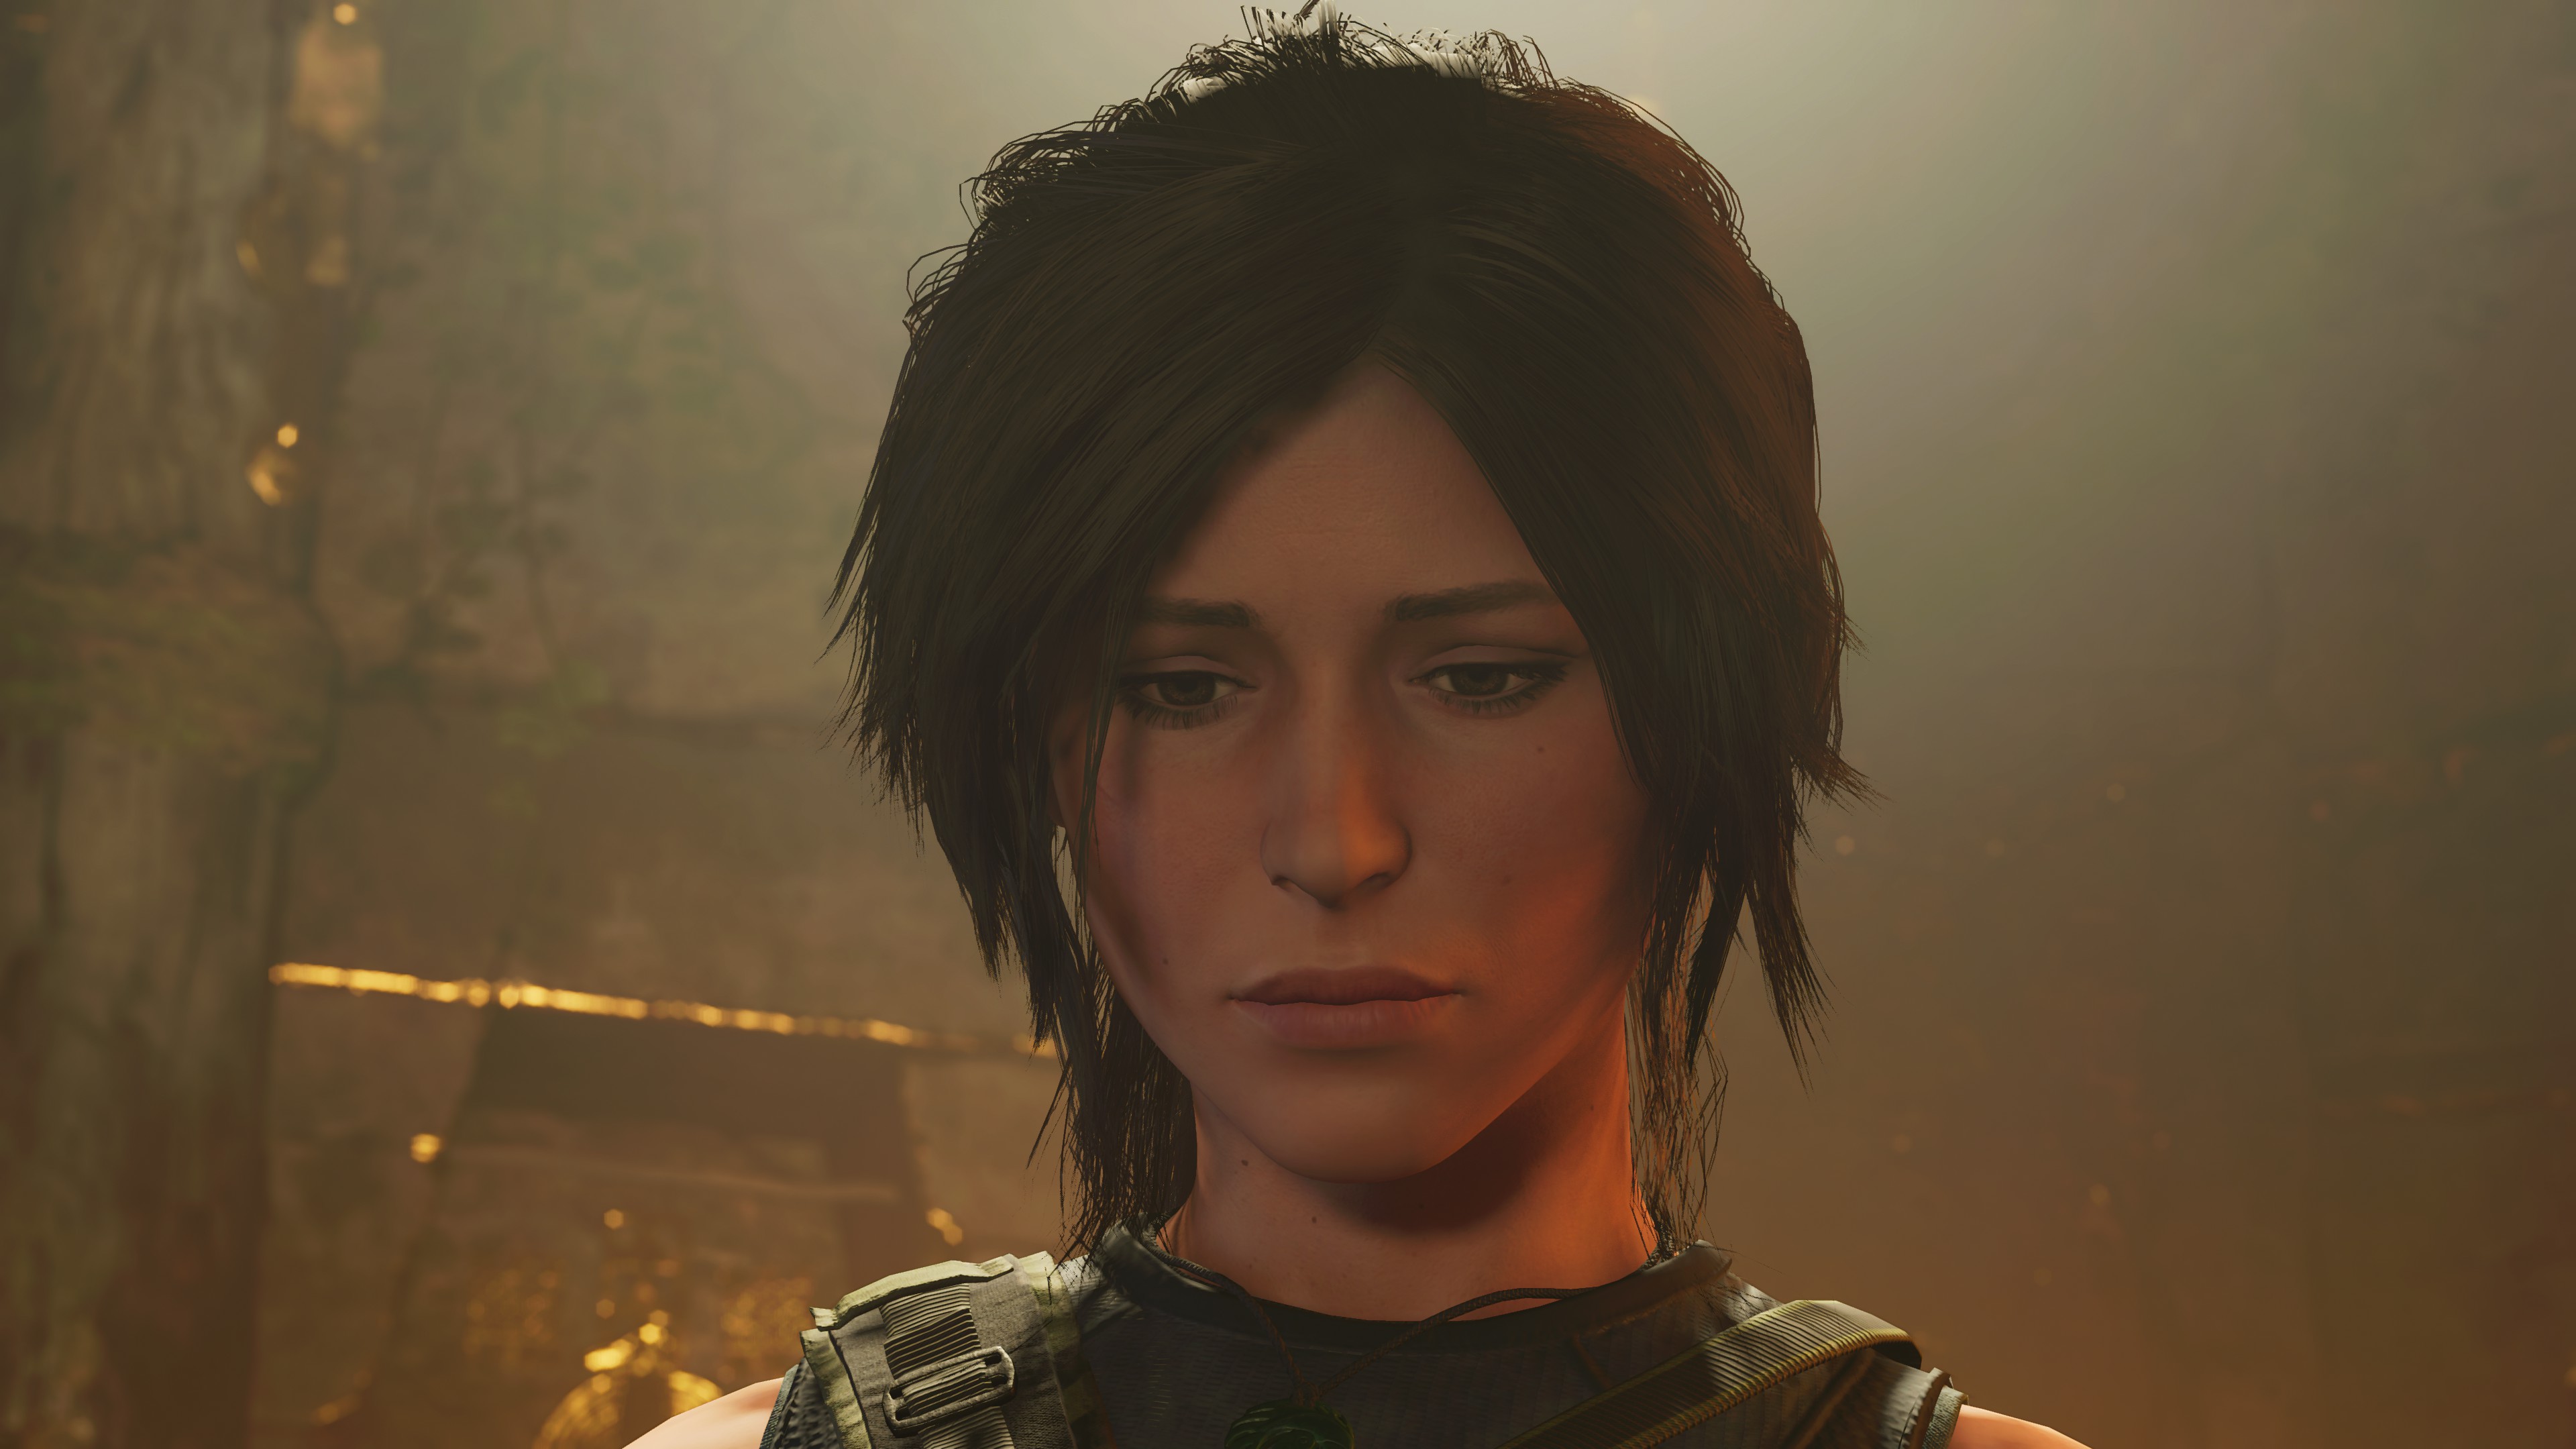 General 3840x2160 Shadow of the Tomb Raider video games Tomb Raider Lara Croft (Tomb Raider) face video game girls video game characters